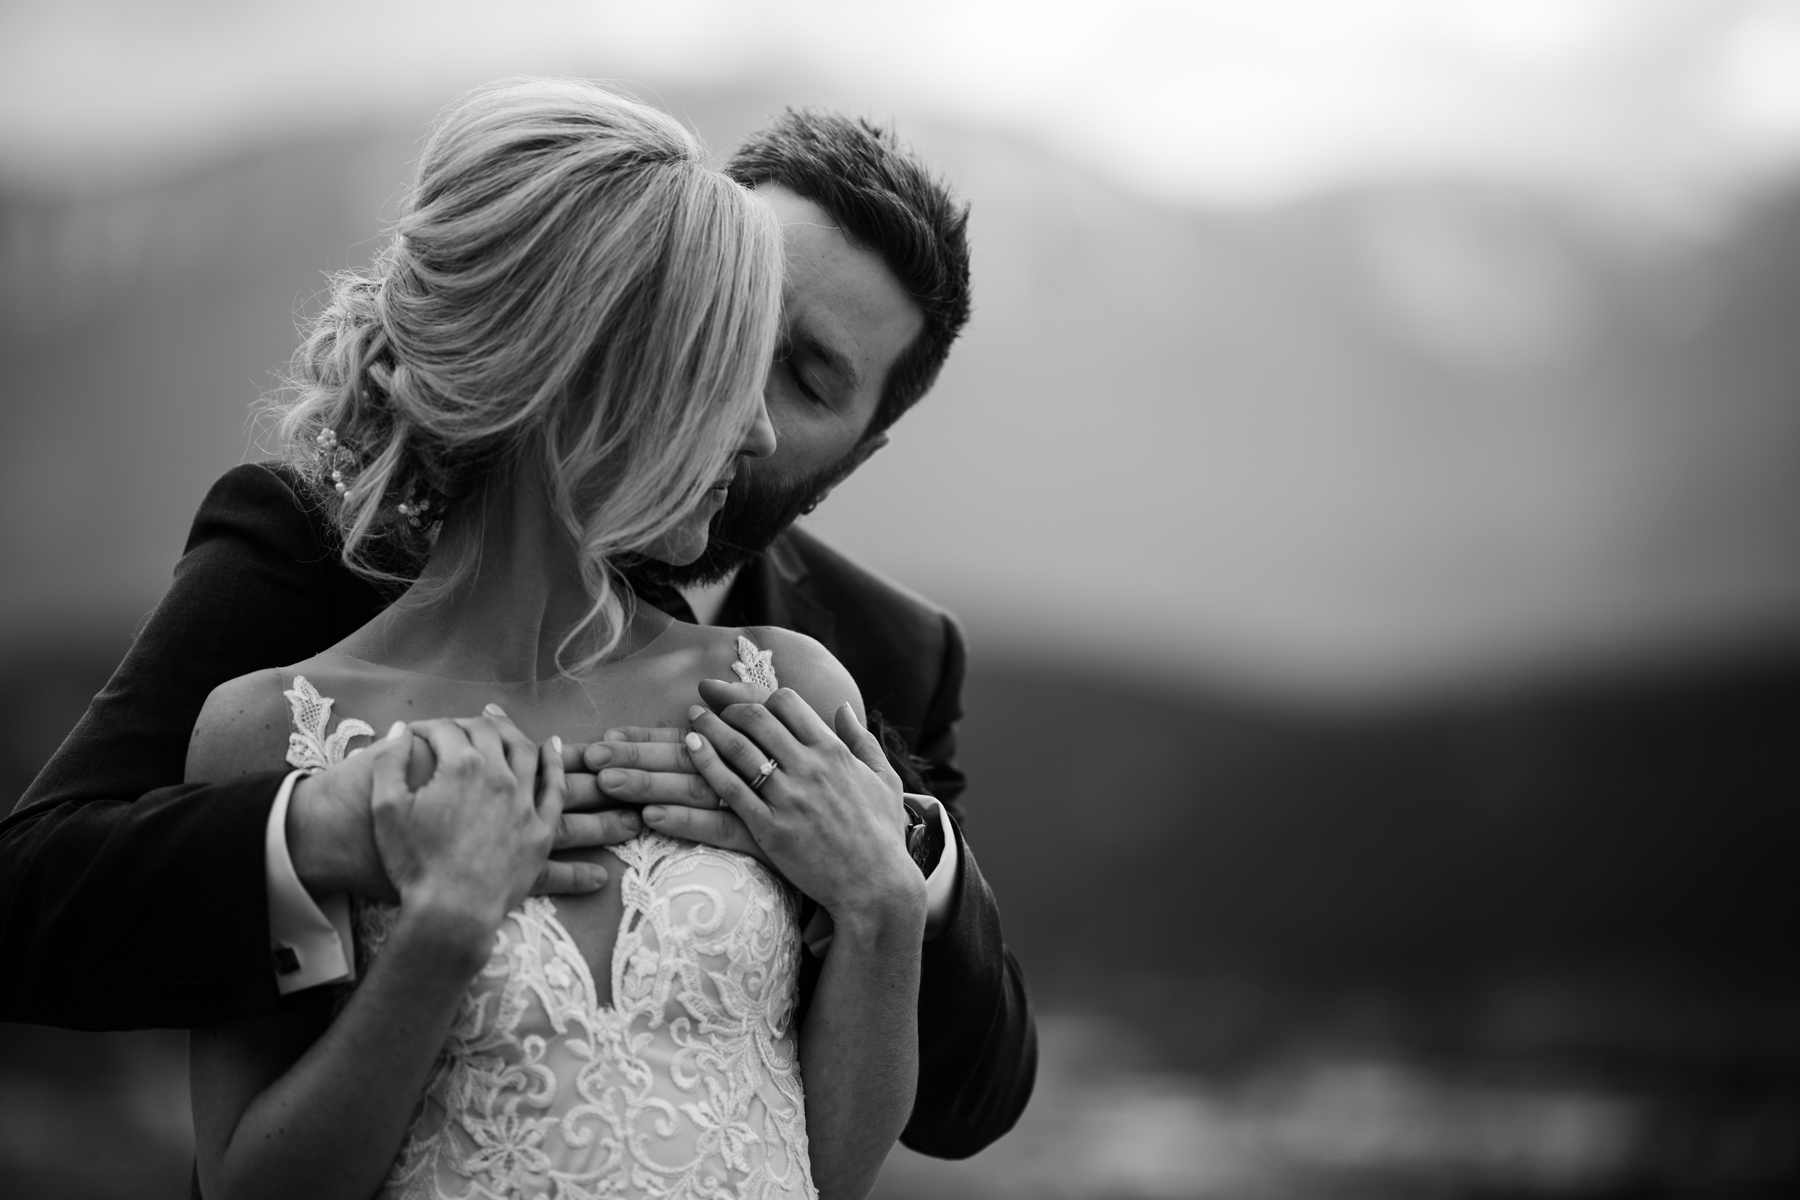 Calgary wedding photographer in Invermere for adventurous mountain destination elopement at Eagle Ranch Golf Resort, British Columbia - Image 27